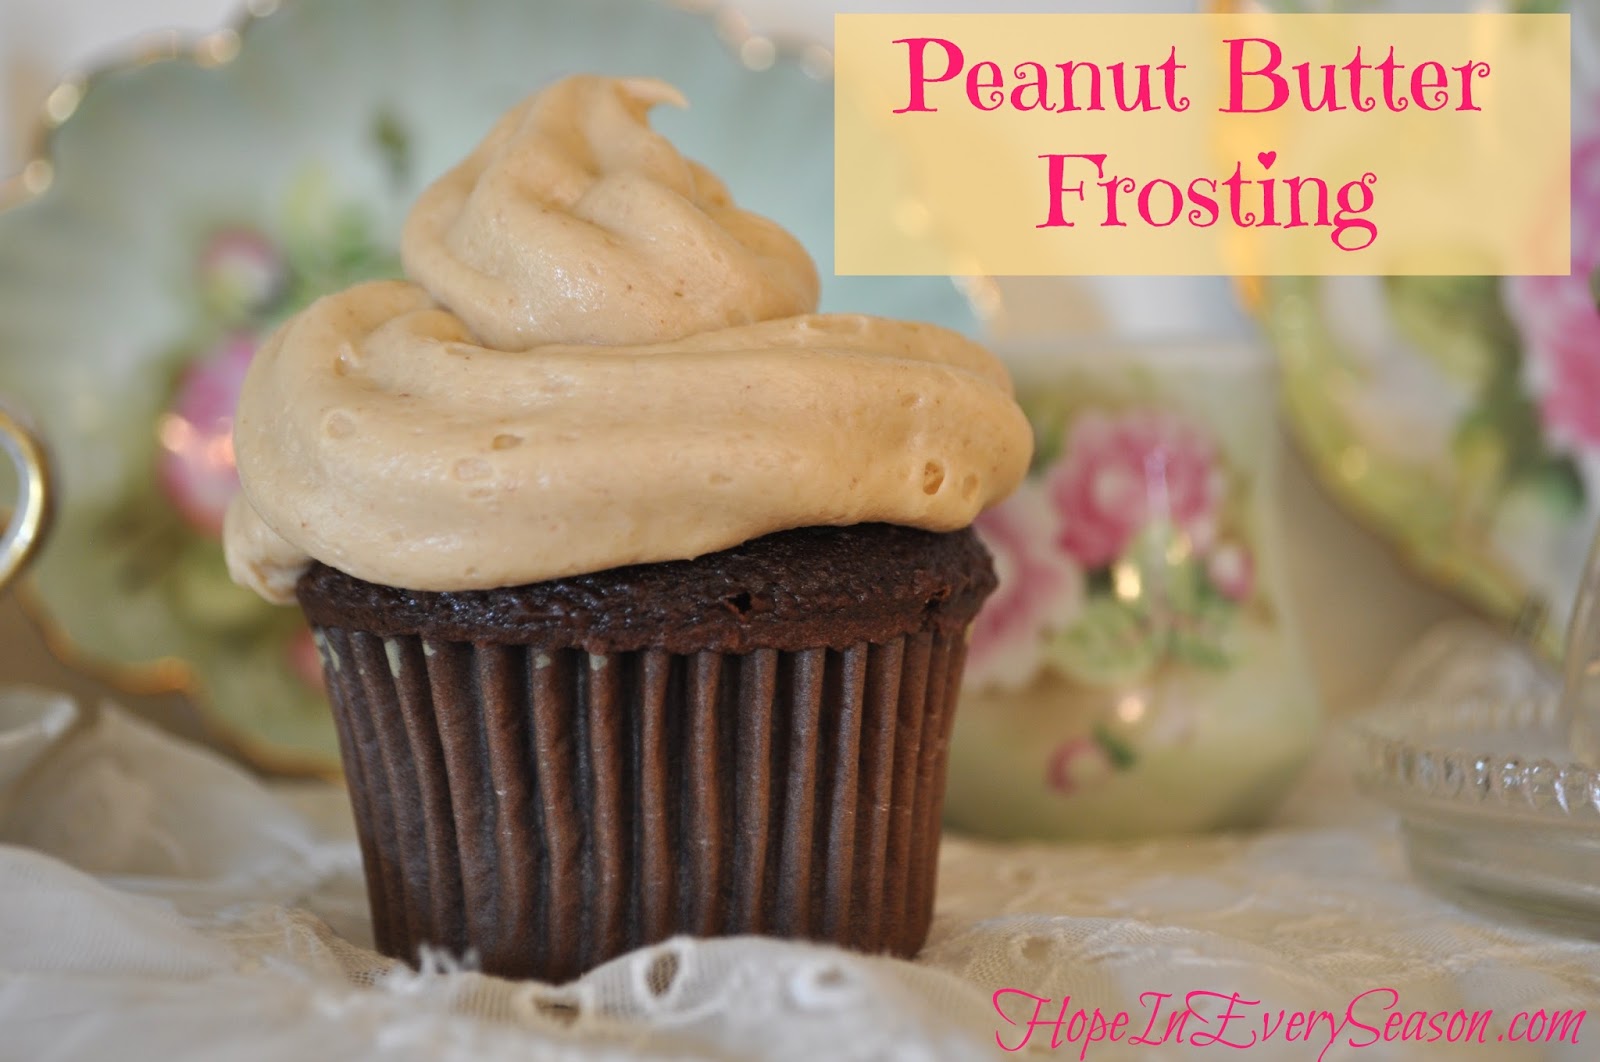 Classical Homemaking: Peanut Butter Frosting